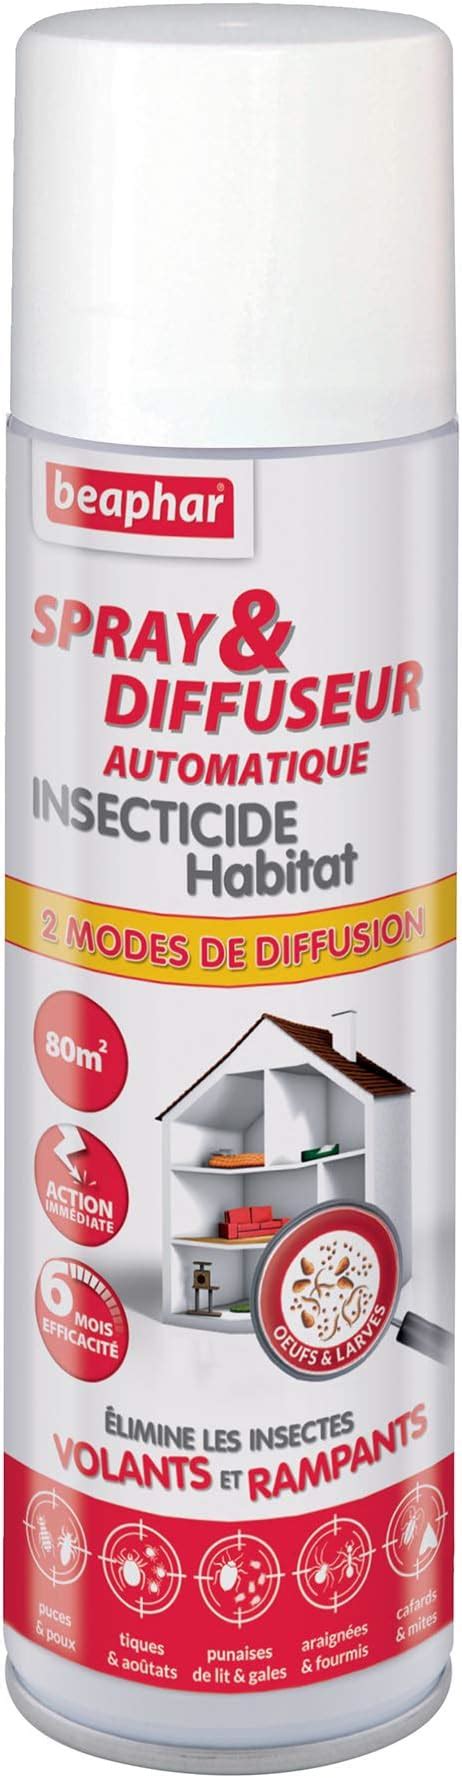 Beaphar Spray And Diffuseur Automatique Insecticide Habitat Tue Les